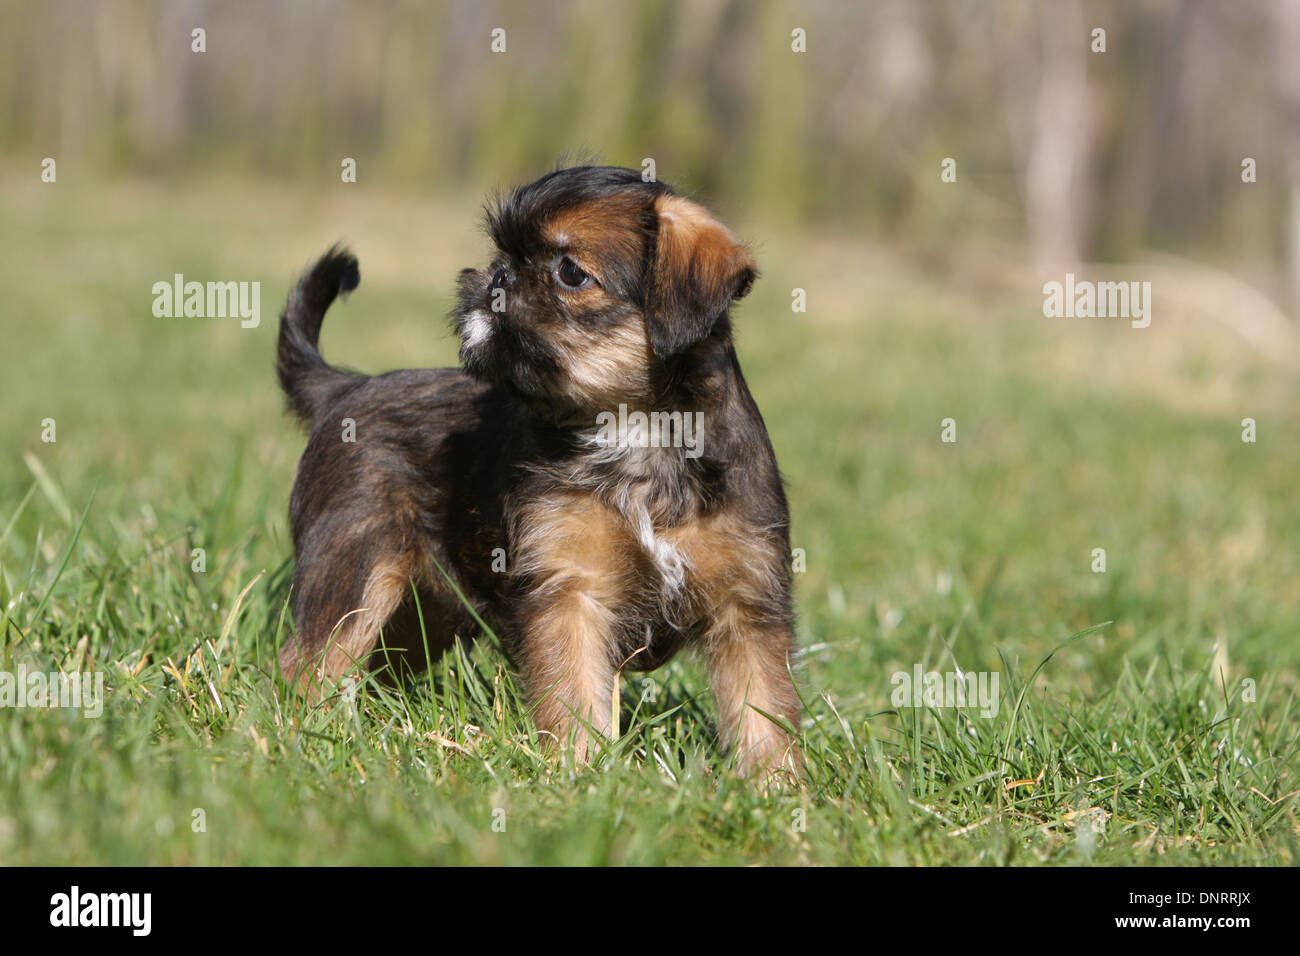 dog Brussels Griffon / Griffon Bruxellois  puppy standing in a meadow Stock Photo